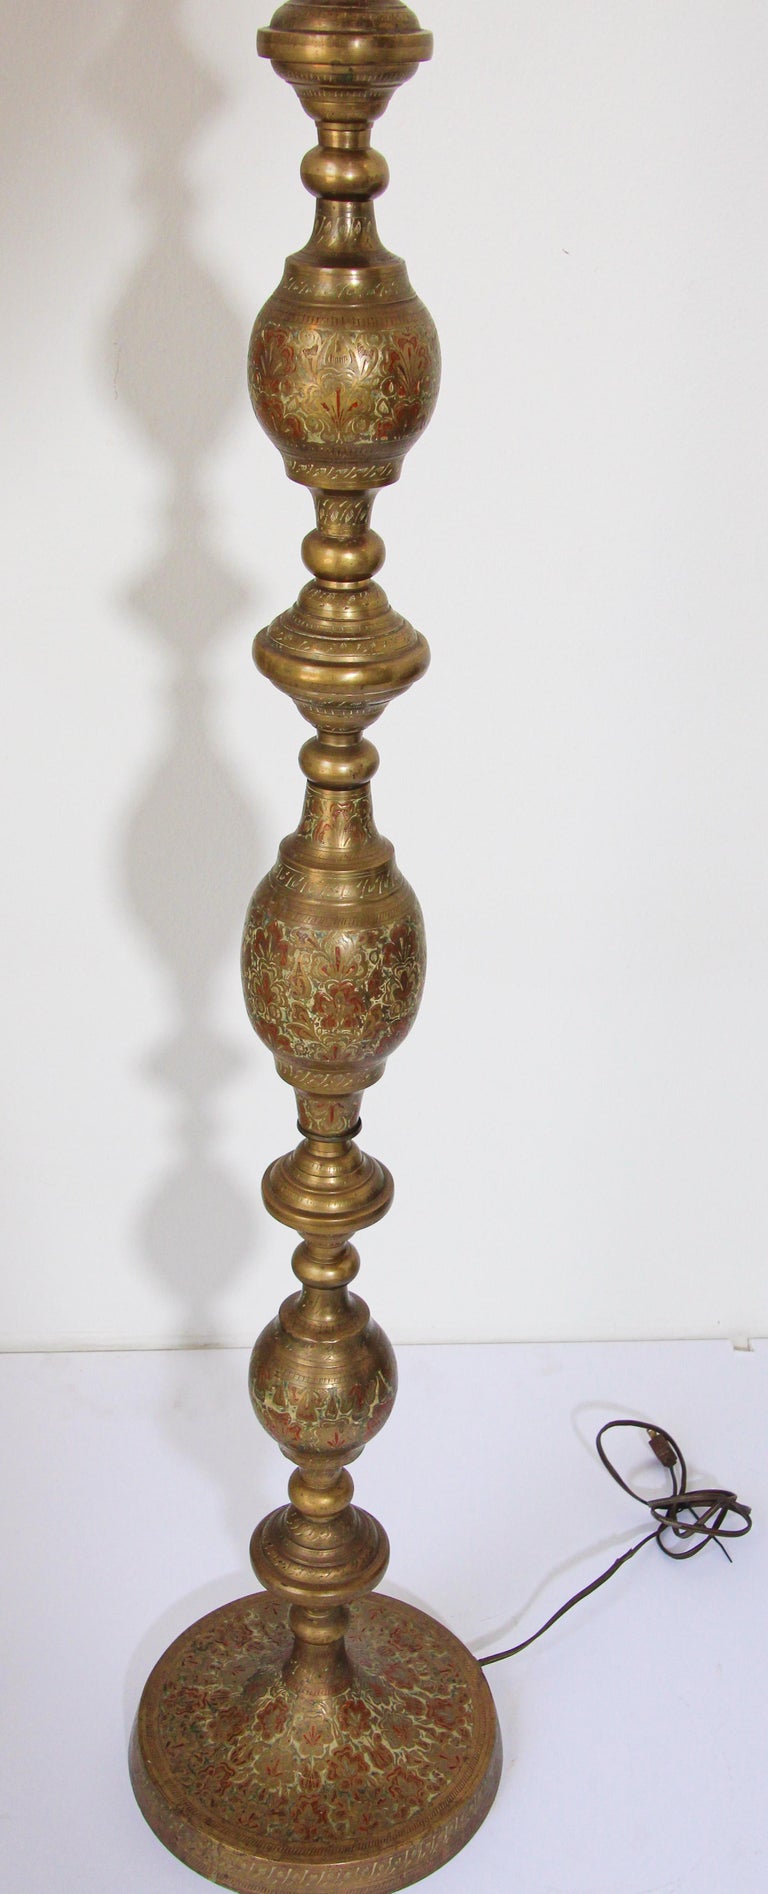 Vintage Brass and Enamel Floor Lamp Handcrafted in India at 1stDibs